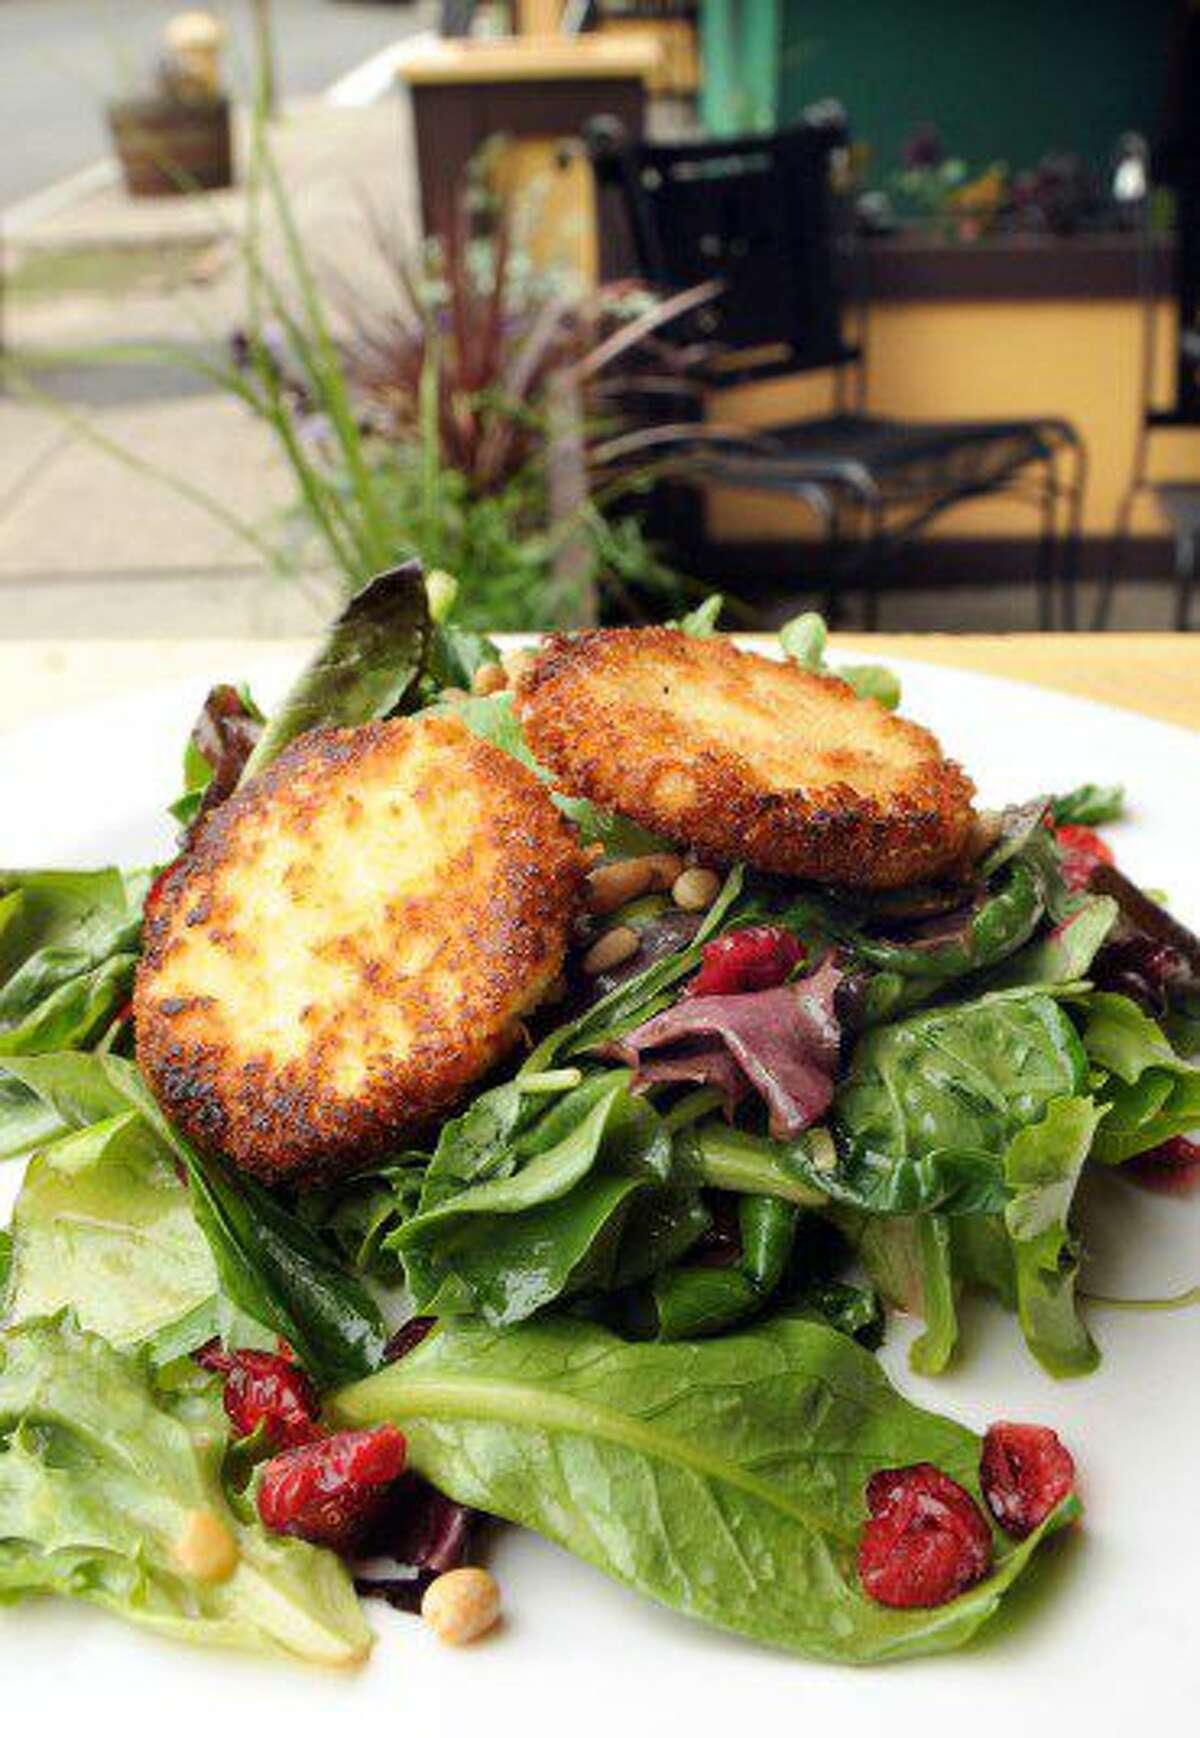 Vermont goat cheese salad: sauteed chevre medallions on baby greens, tossed with a citrus vinaigrette, dried cranberries and pine nuts.